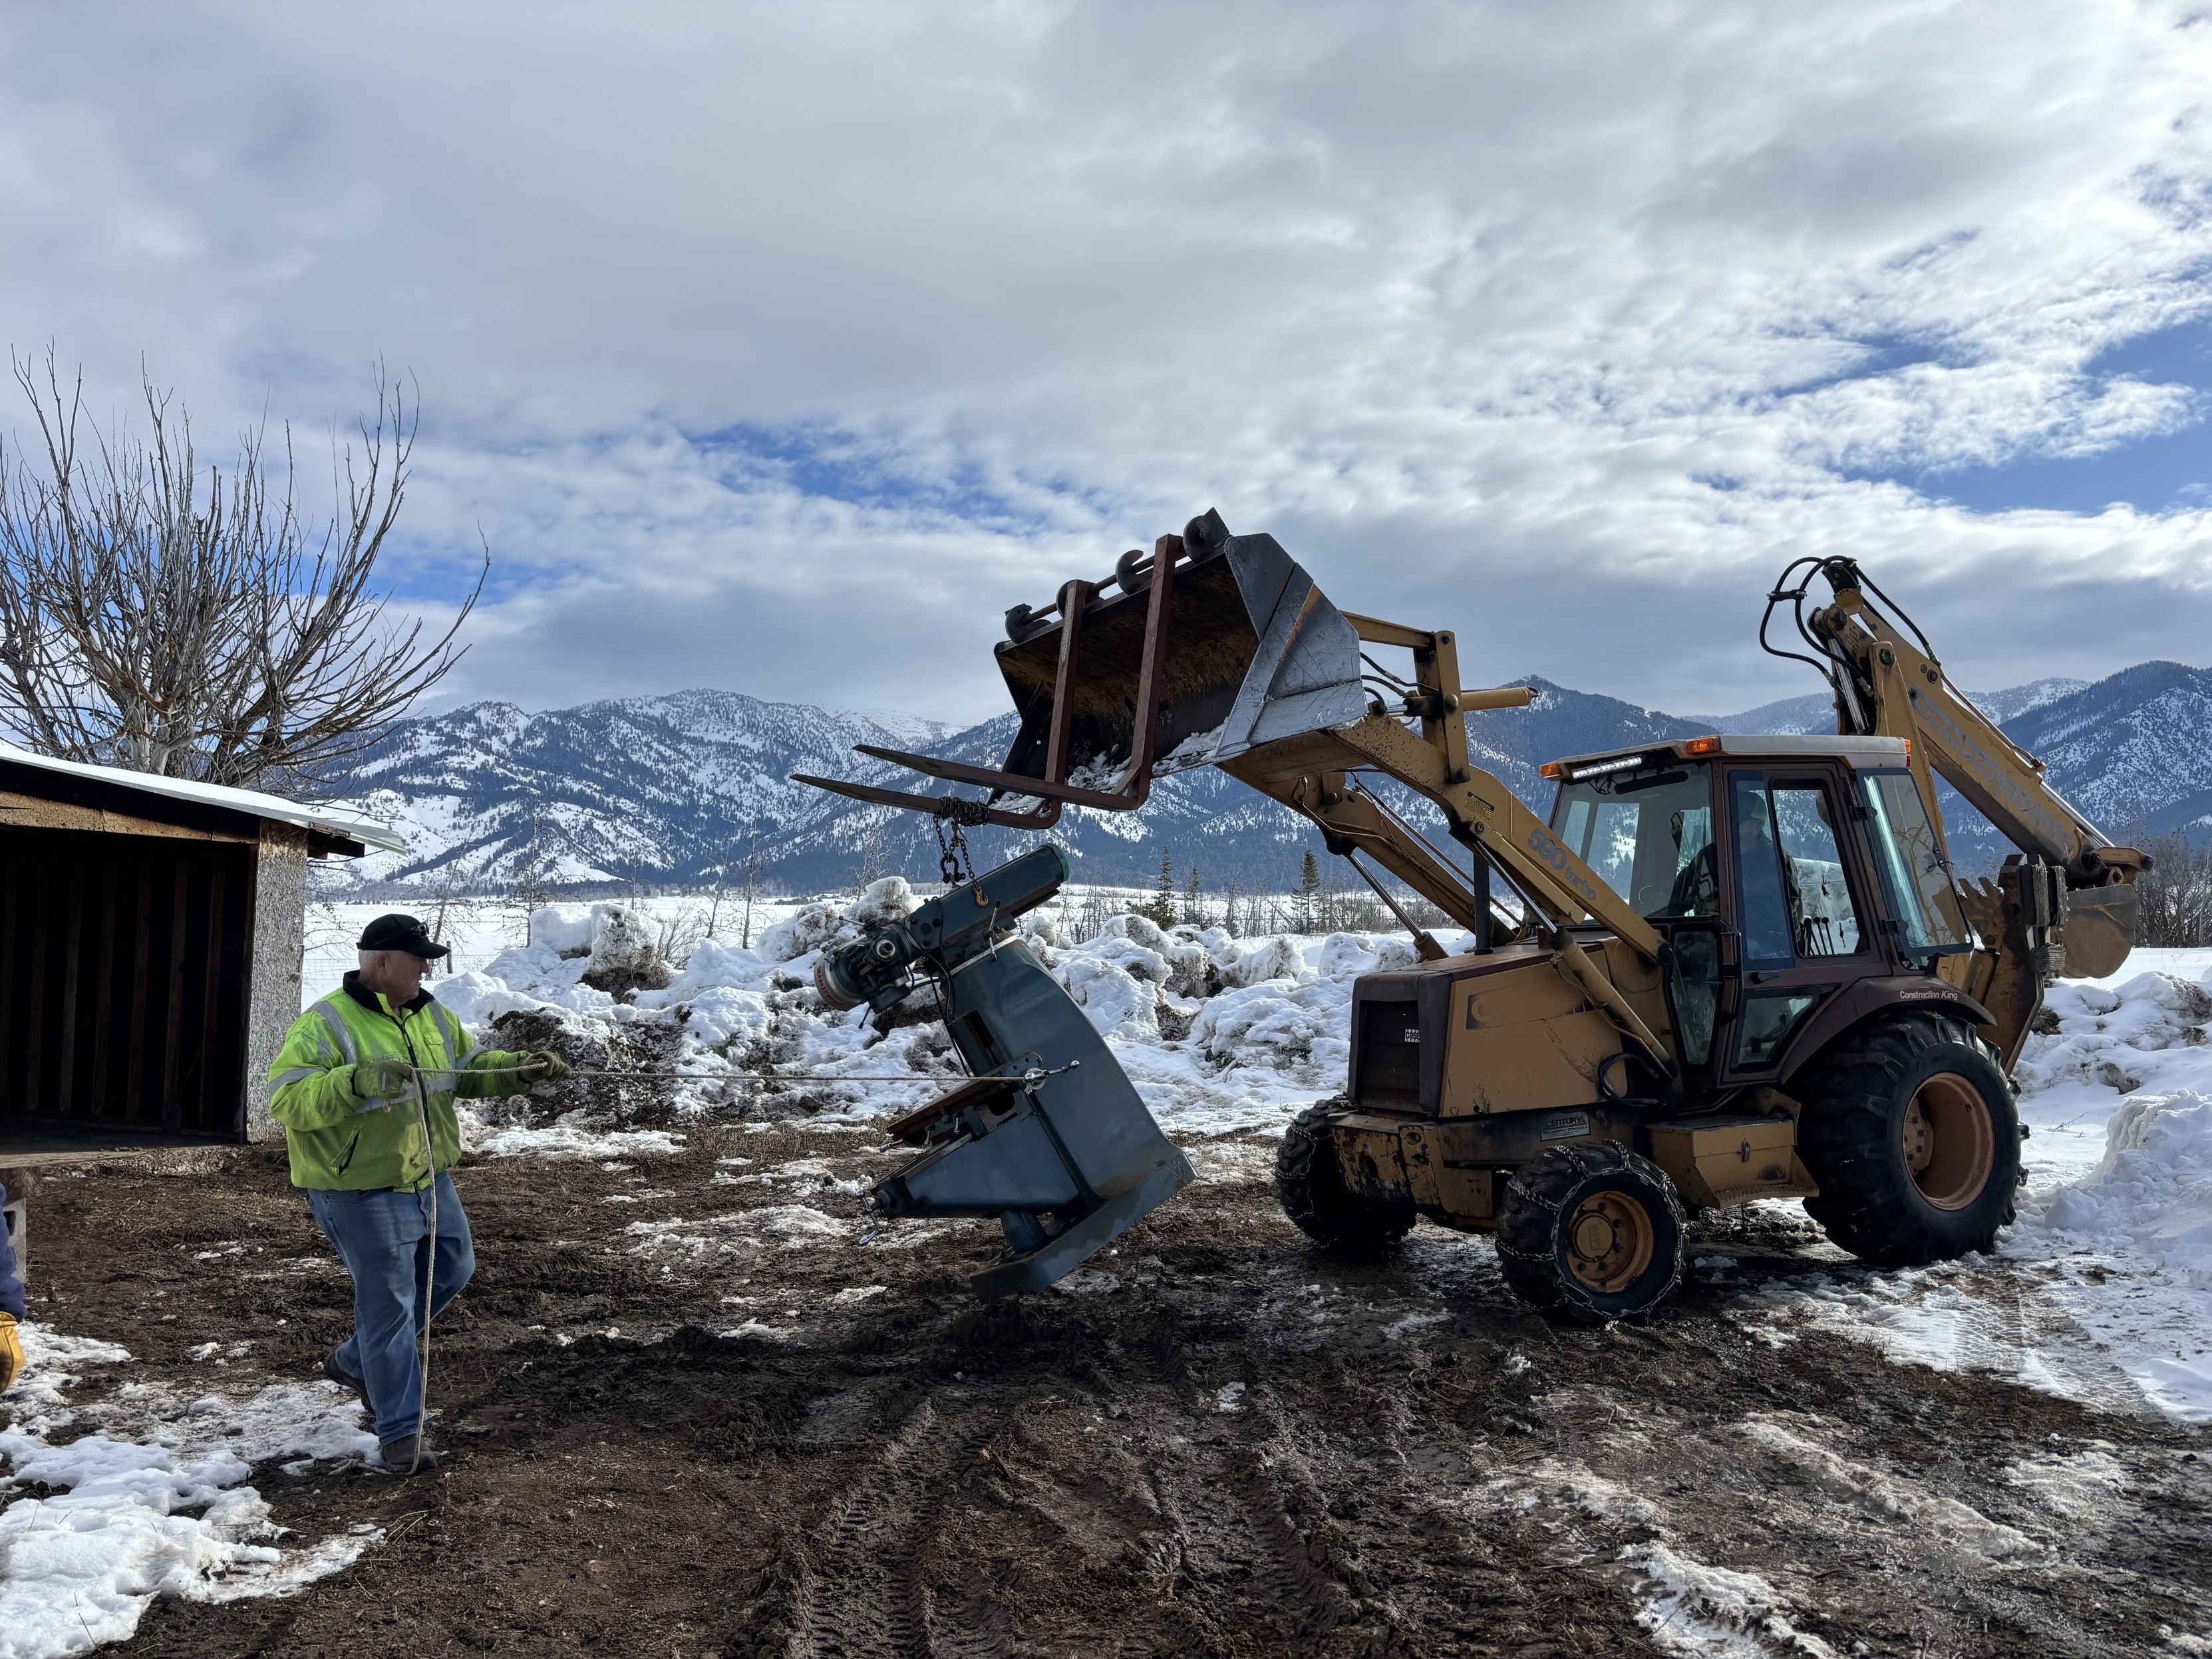 Backhoe lifting a mill while a worker watches. Mountains with snow in the background.